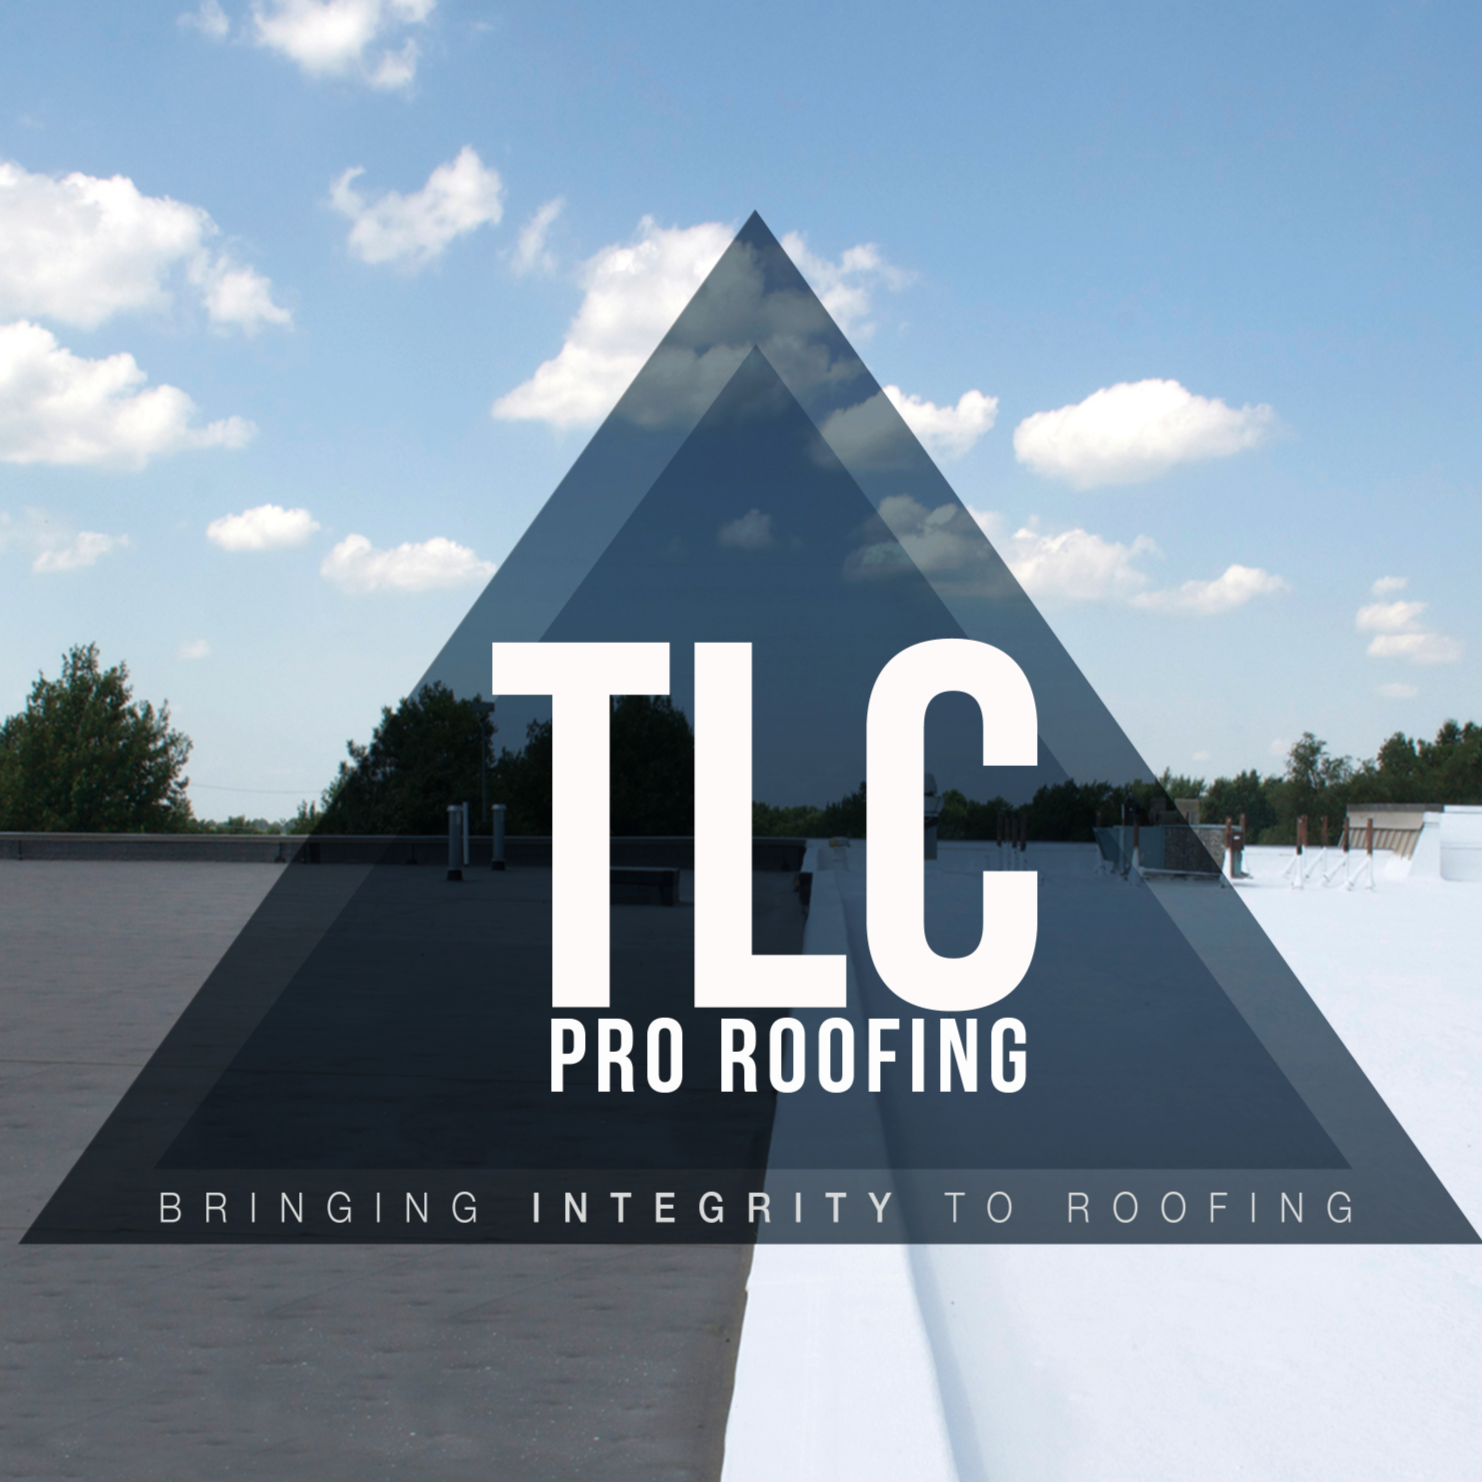 TLC Pro Roofing